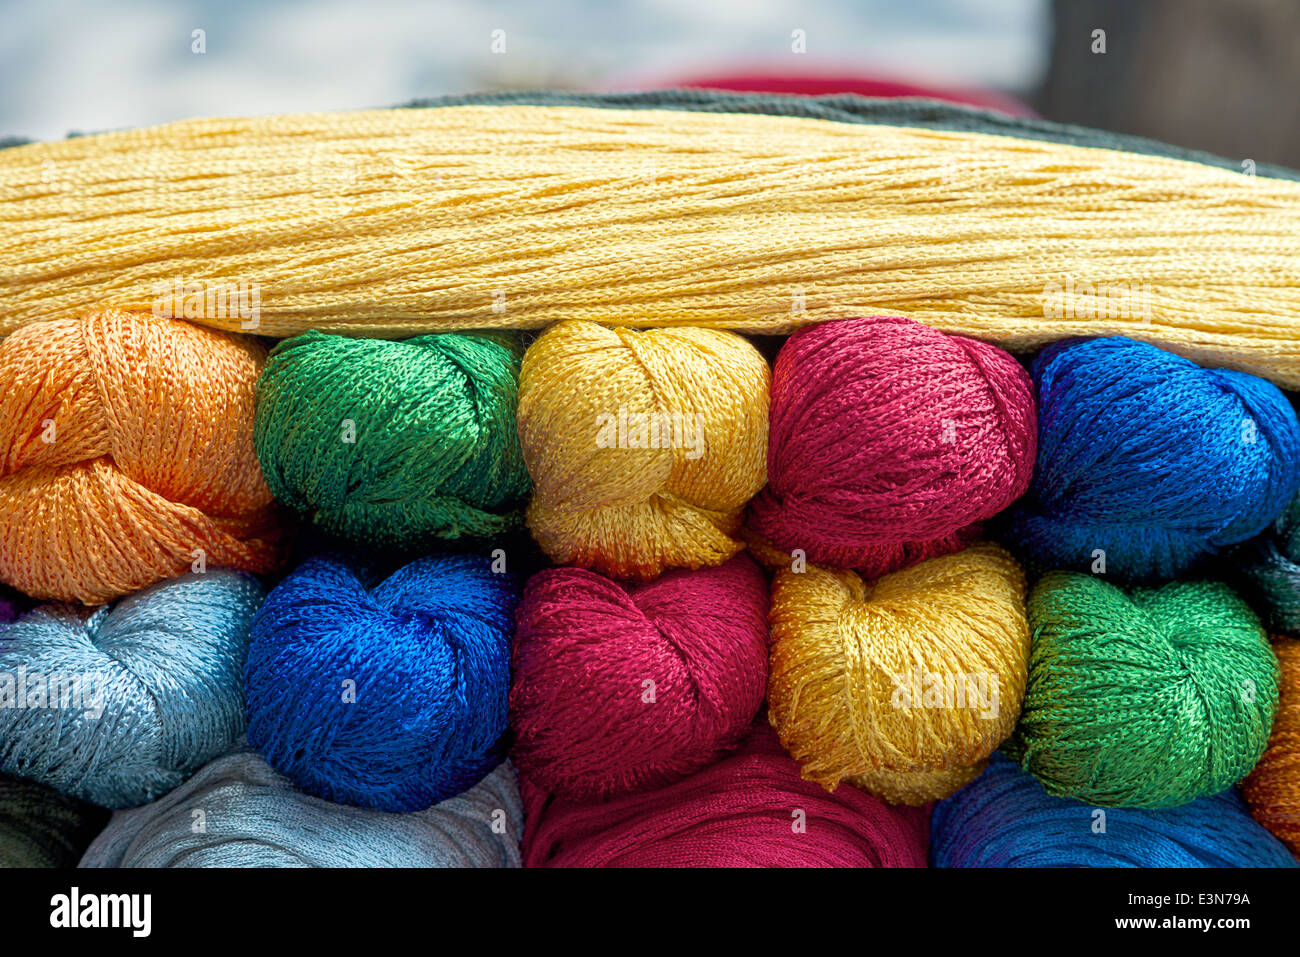 Colorful yarn in the fabric market in Ho Chi Minh City Vietnam Stock Photo